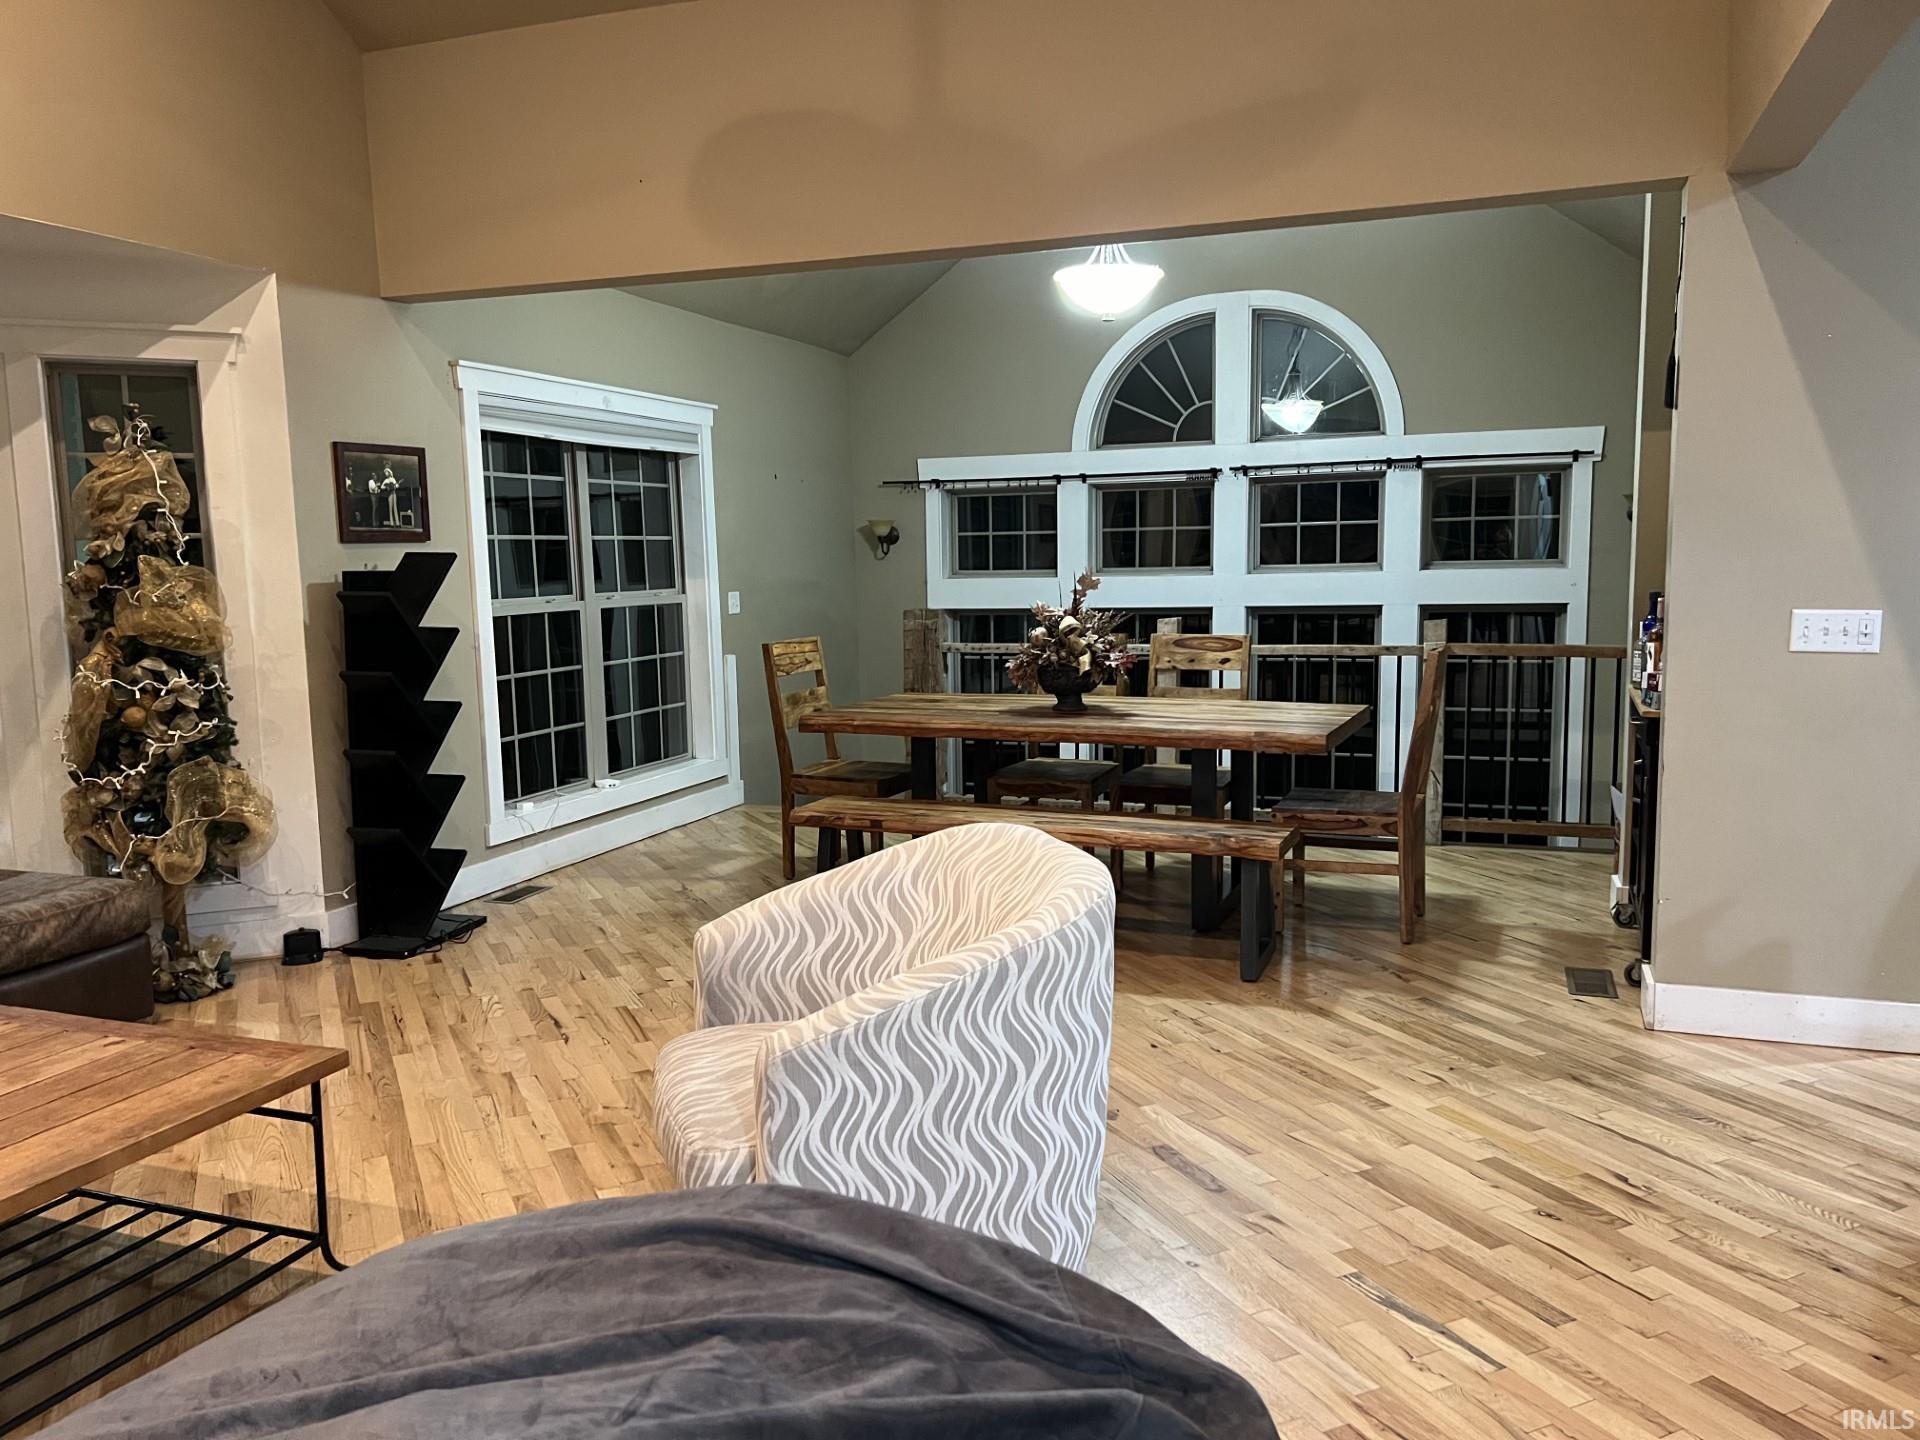 The Living Room and Dining Room are connected for the open concept every homeowner is looking for.